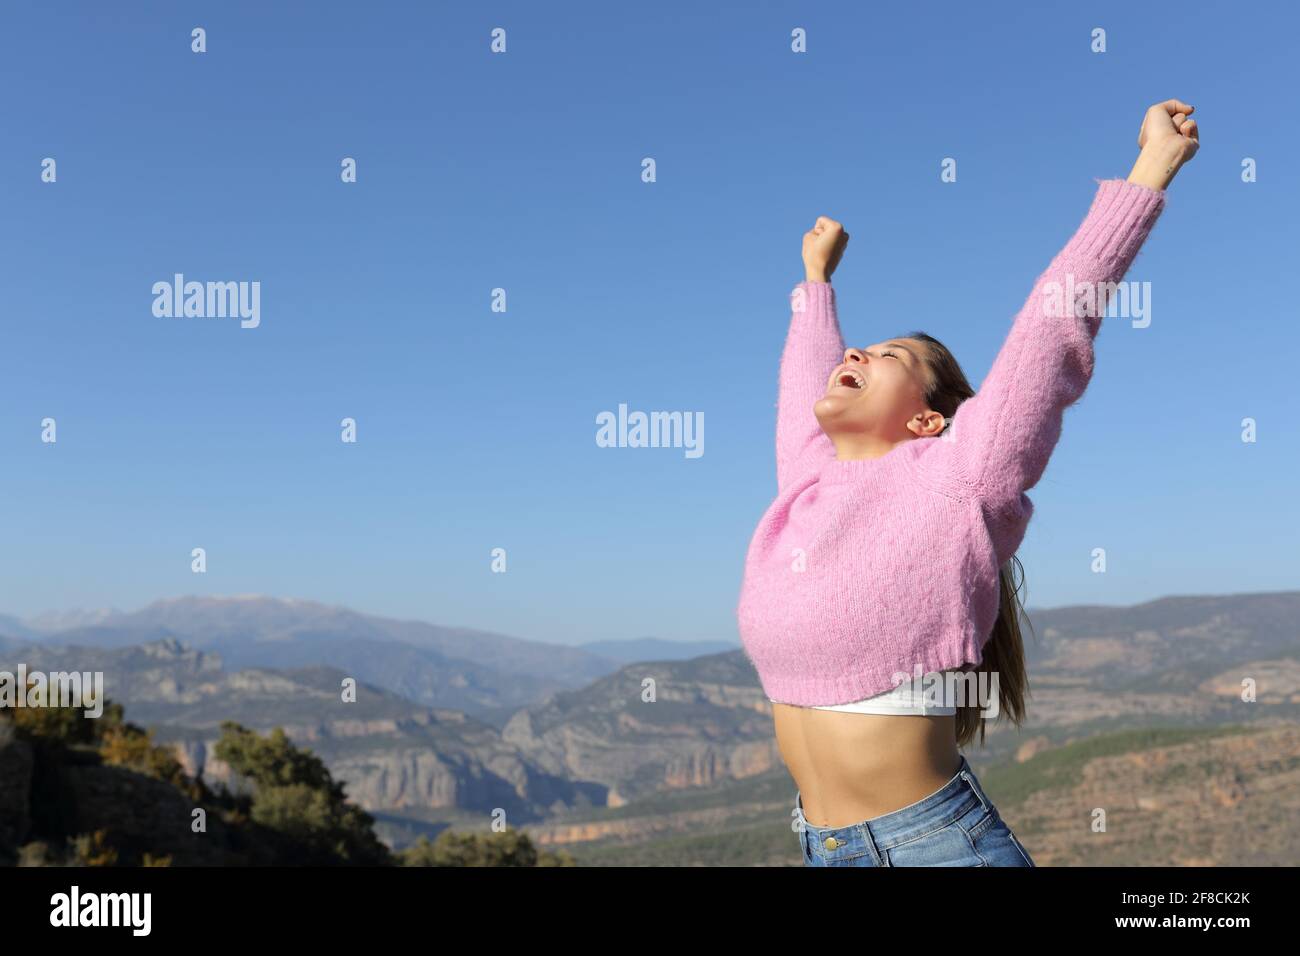 Excited woman in pink raising arms celebrating vacation in the mountain a sunny day Stock Photo